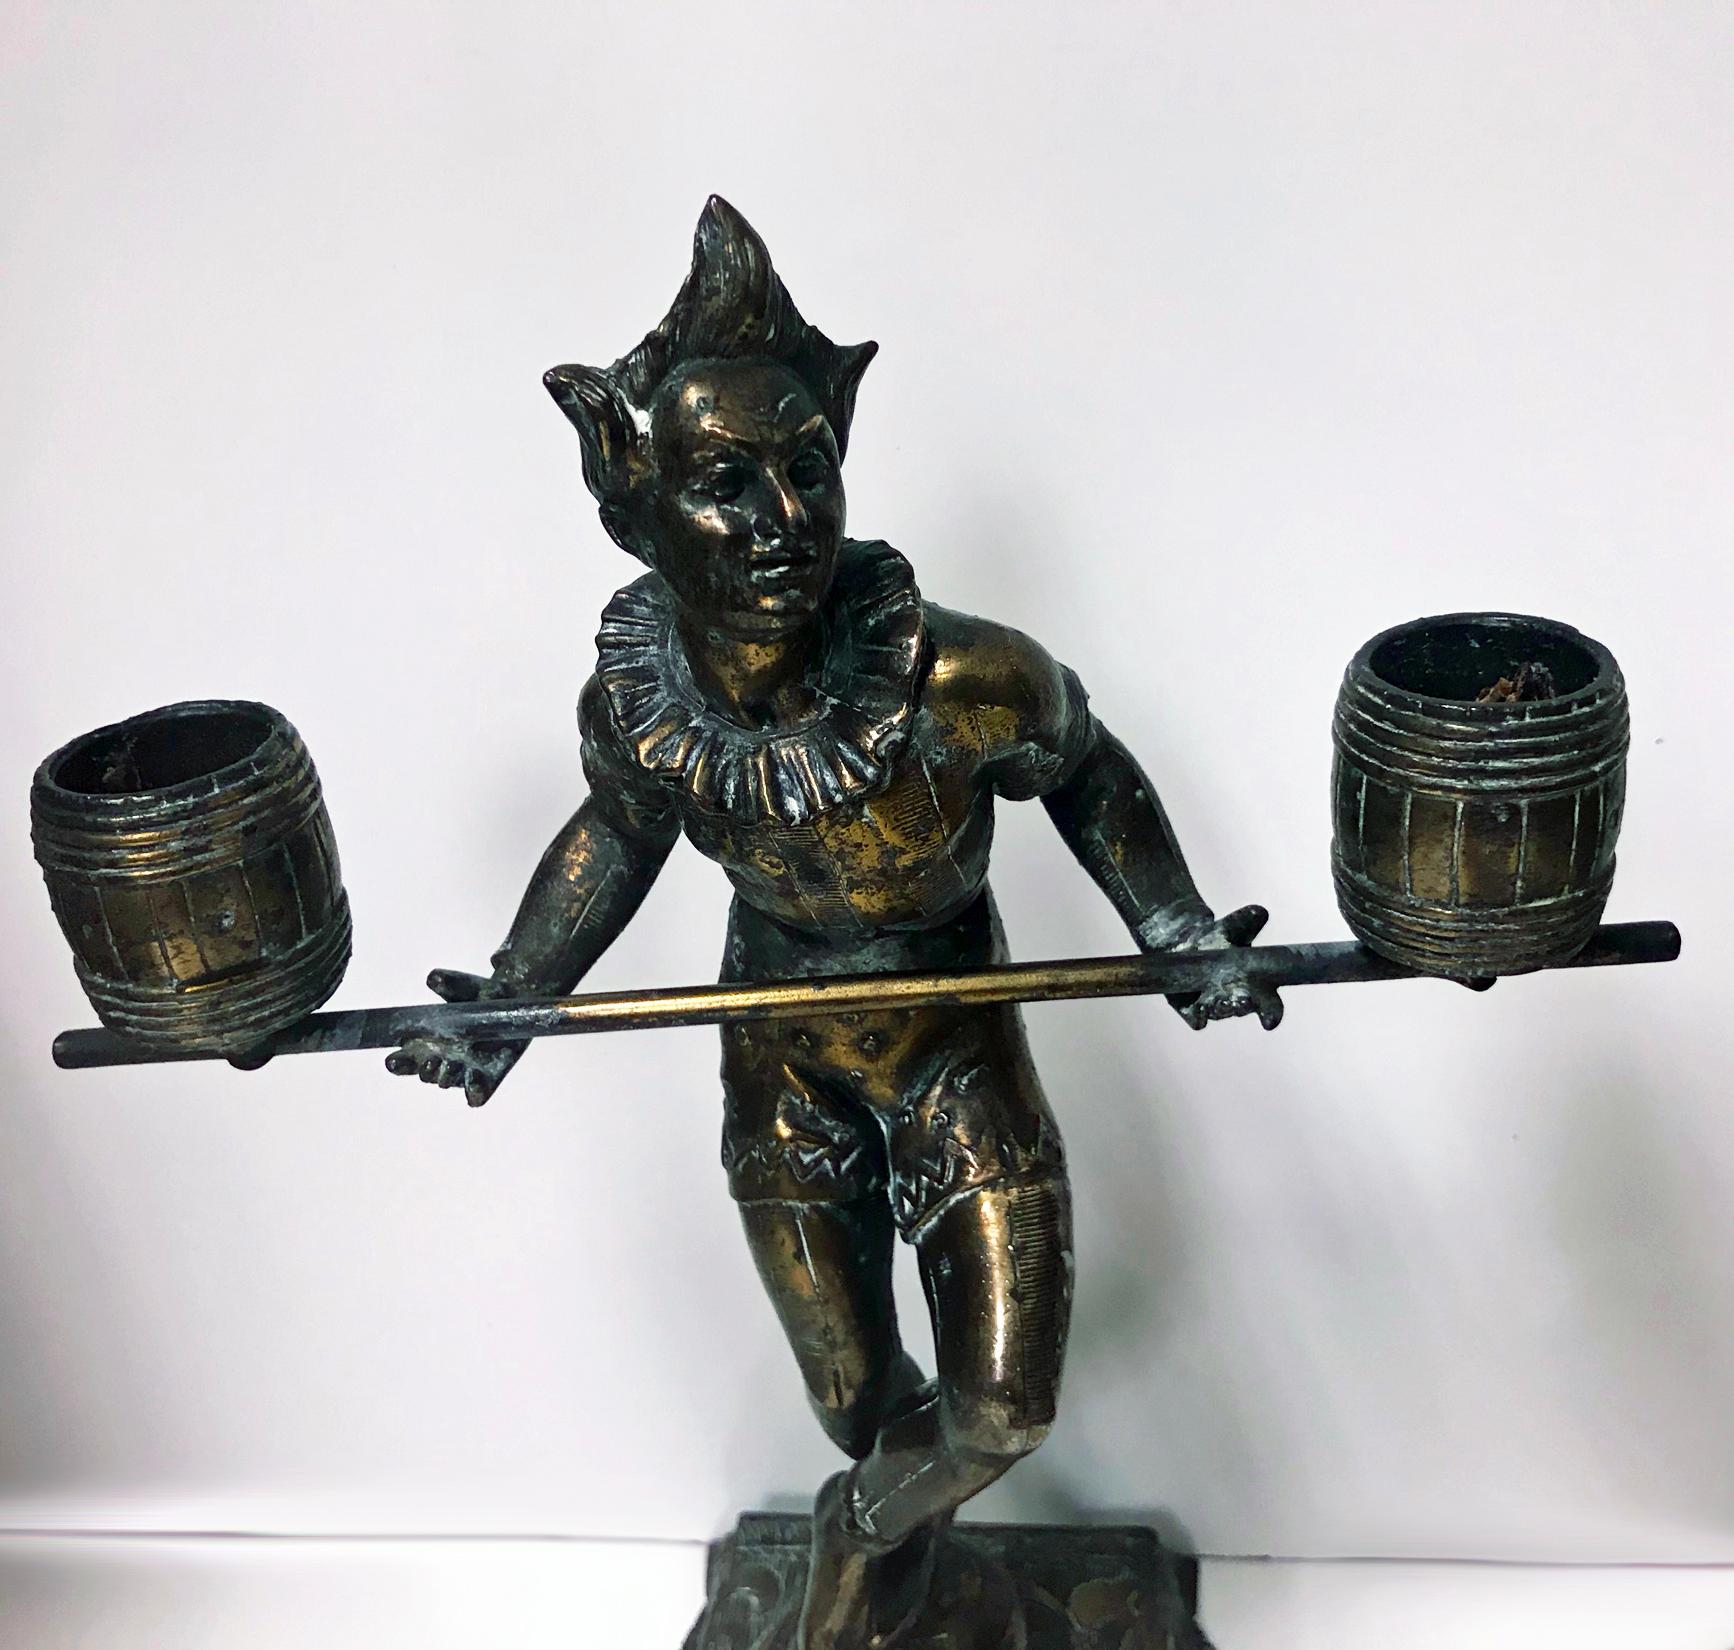 Pair of bronze clown candlesticks sculptures, probably French, circa 1890. Each depicting a clown in costume balancing two barrels on a pole forming candleholders with one leg balancing on a ball. All surmounted on eastern carpet style base